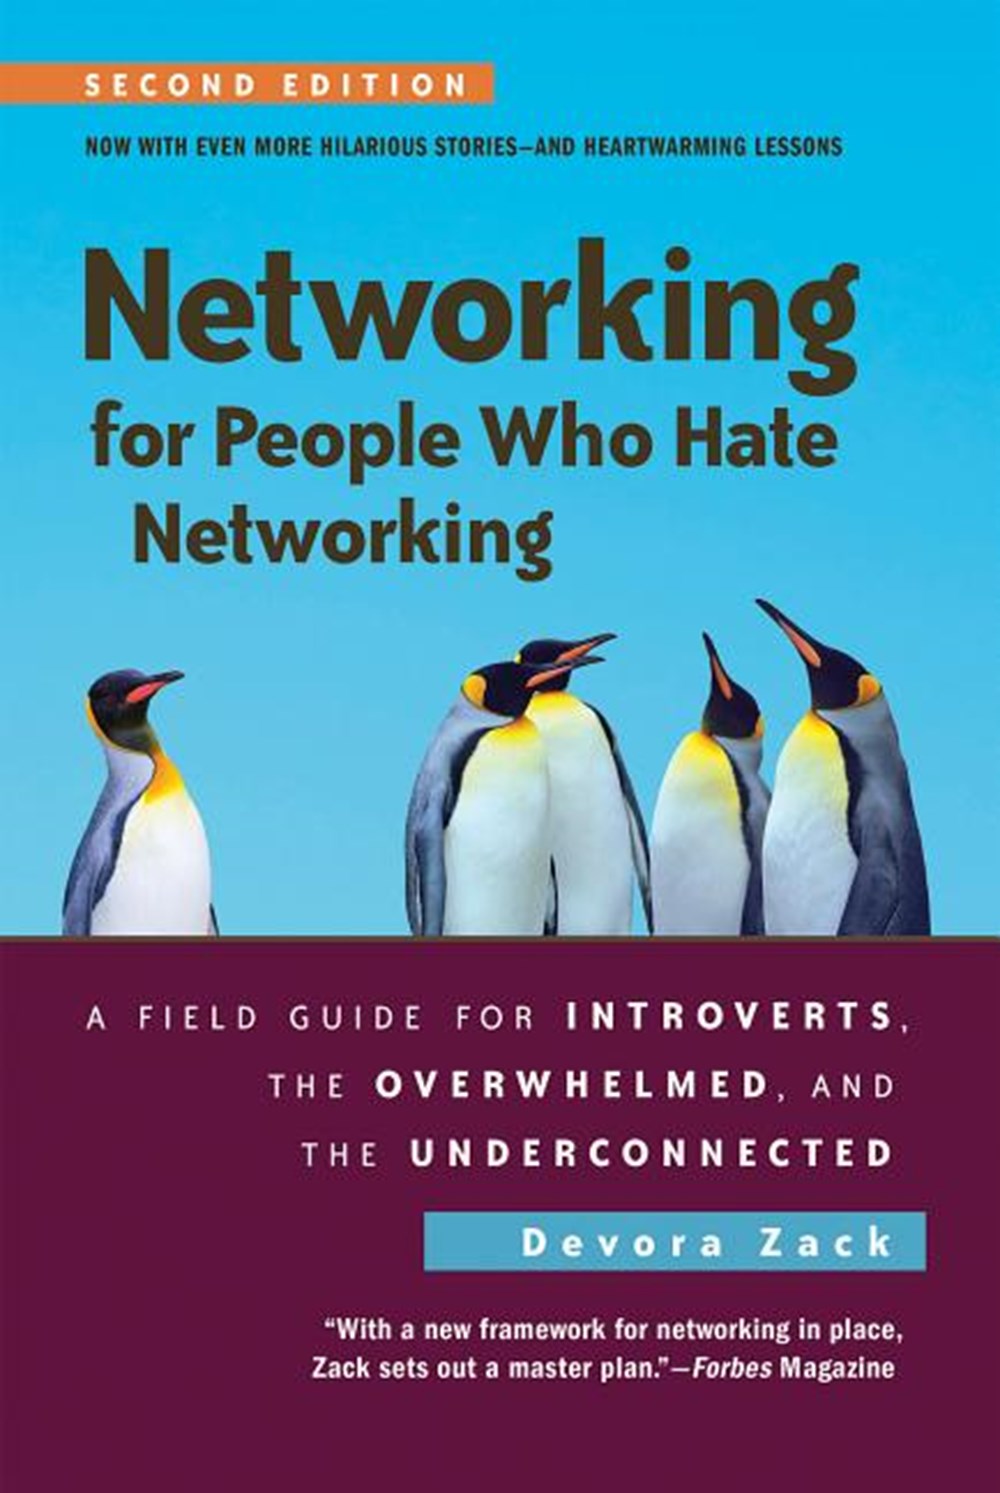 Networking for People Who Hate Networking, Second Edition: A Field Guide for Introverts, the Overwhe